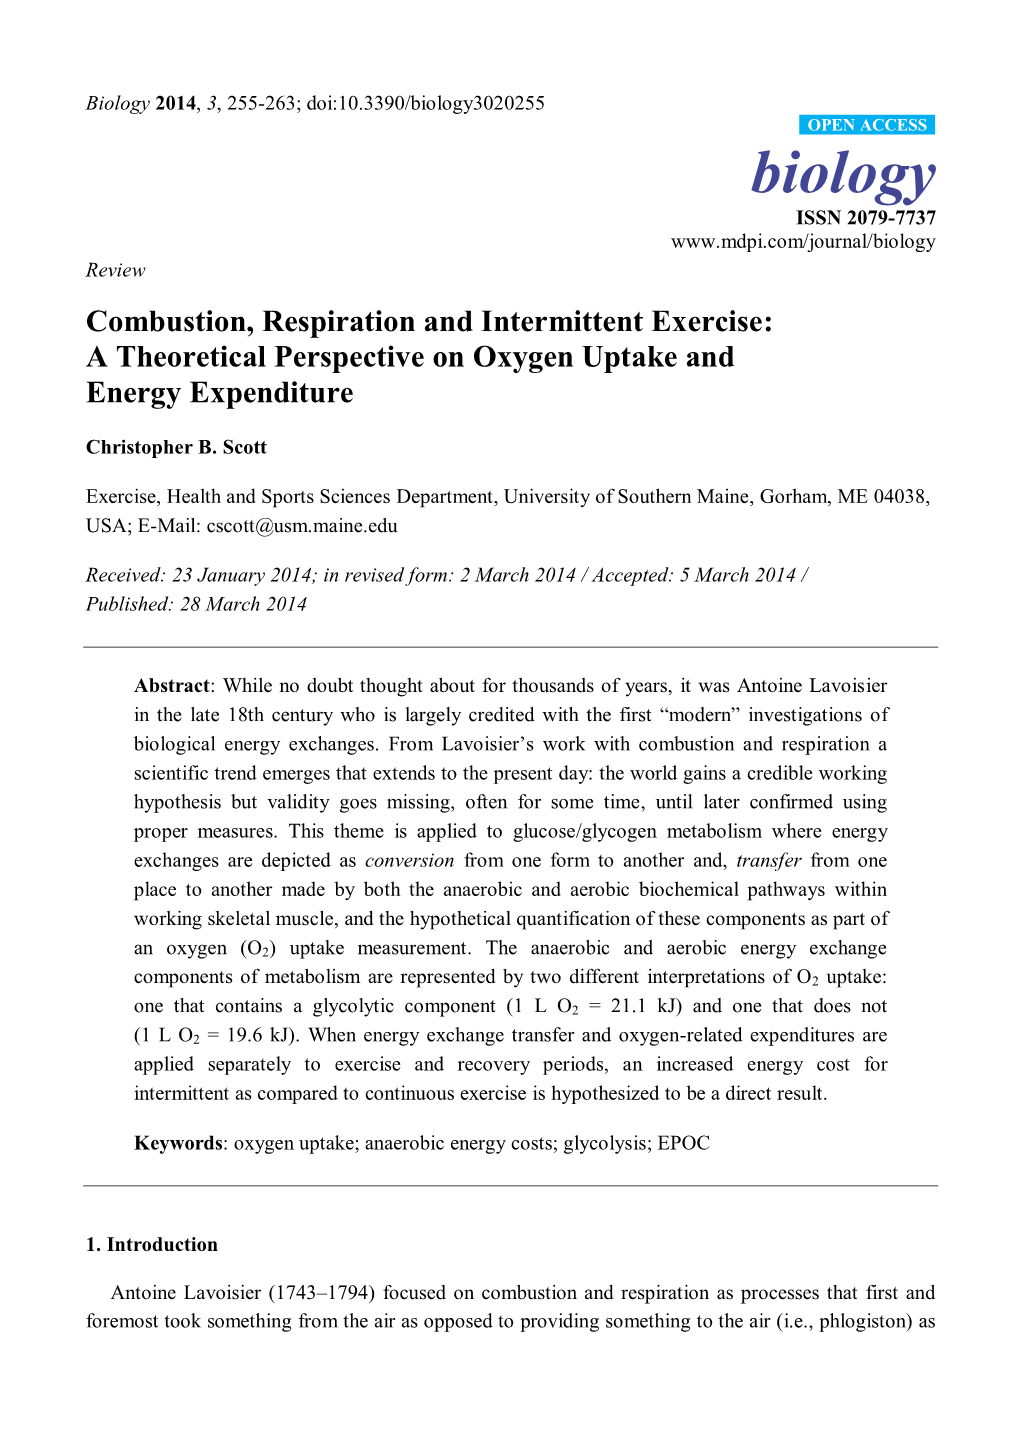 Combustion, Respiration and Intermittent Exercise: a Theoretical Perspective on Oxygen Uptake and Energy Expenditure